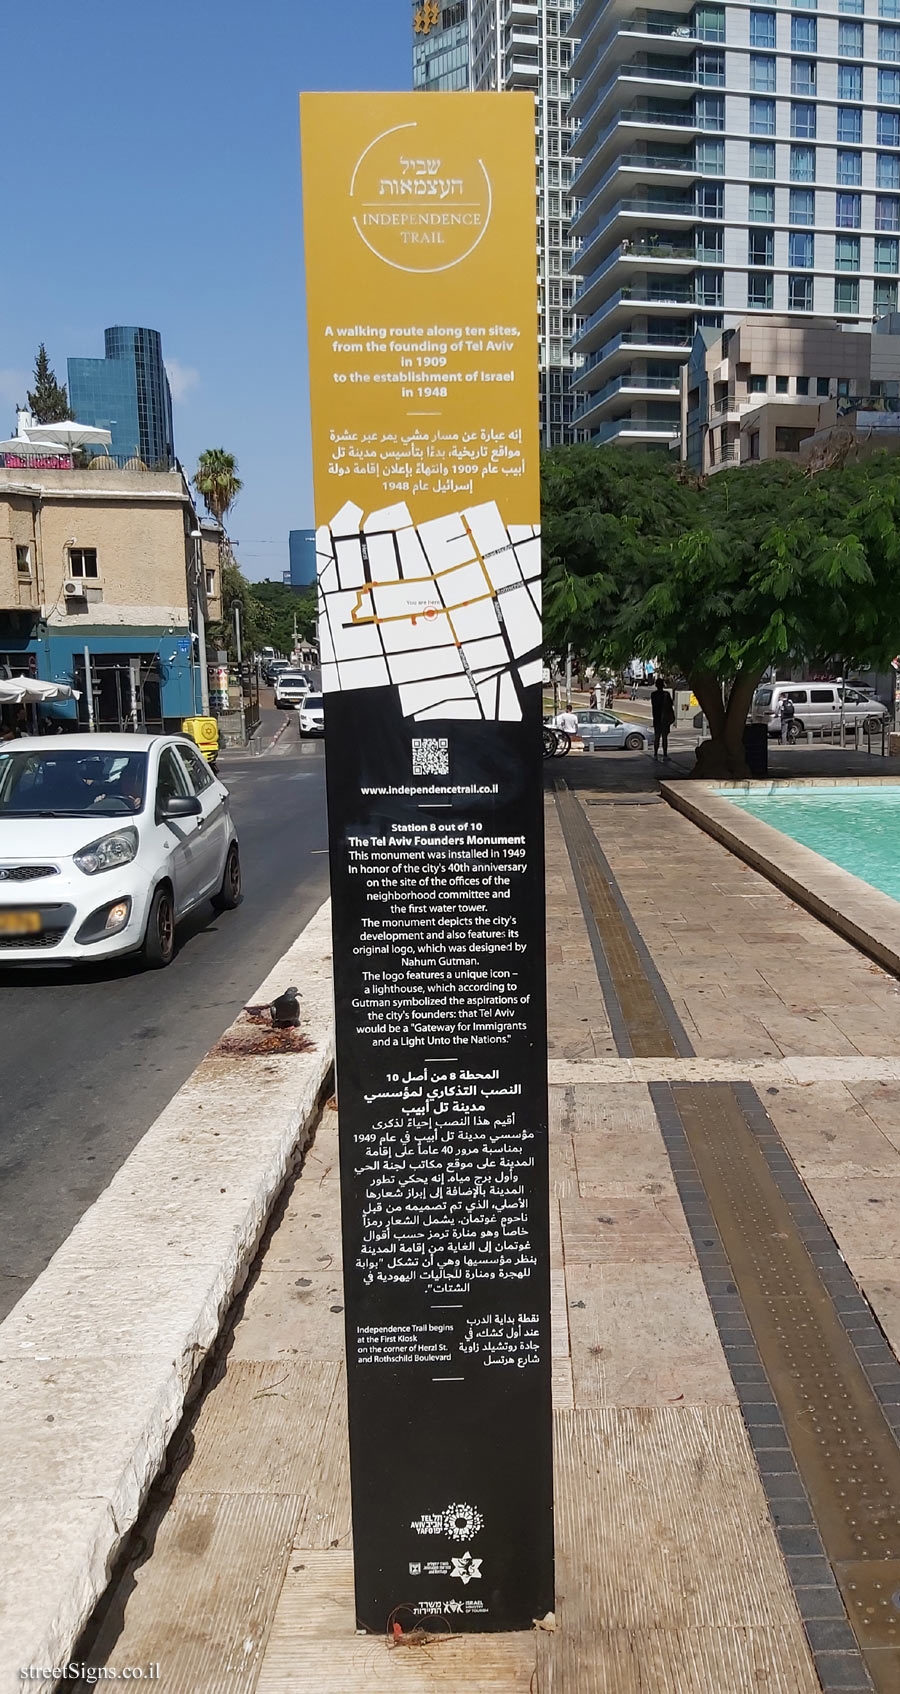 Tel Aviv - Independence Trail - Tel Aviv Founders Monument - Information (English and Arabic)